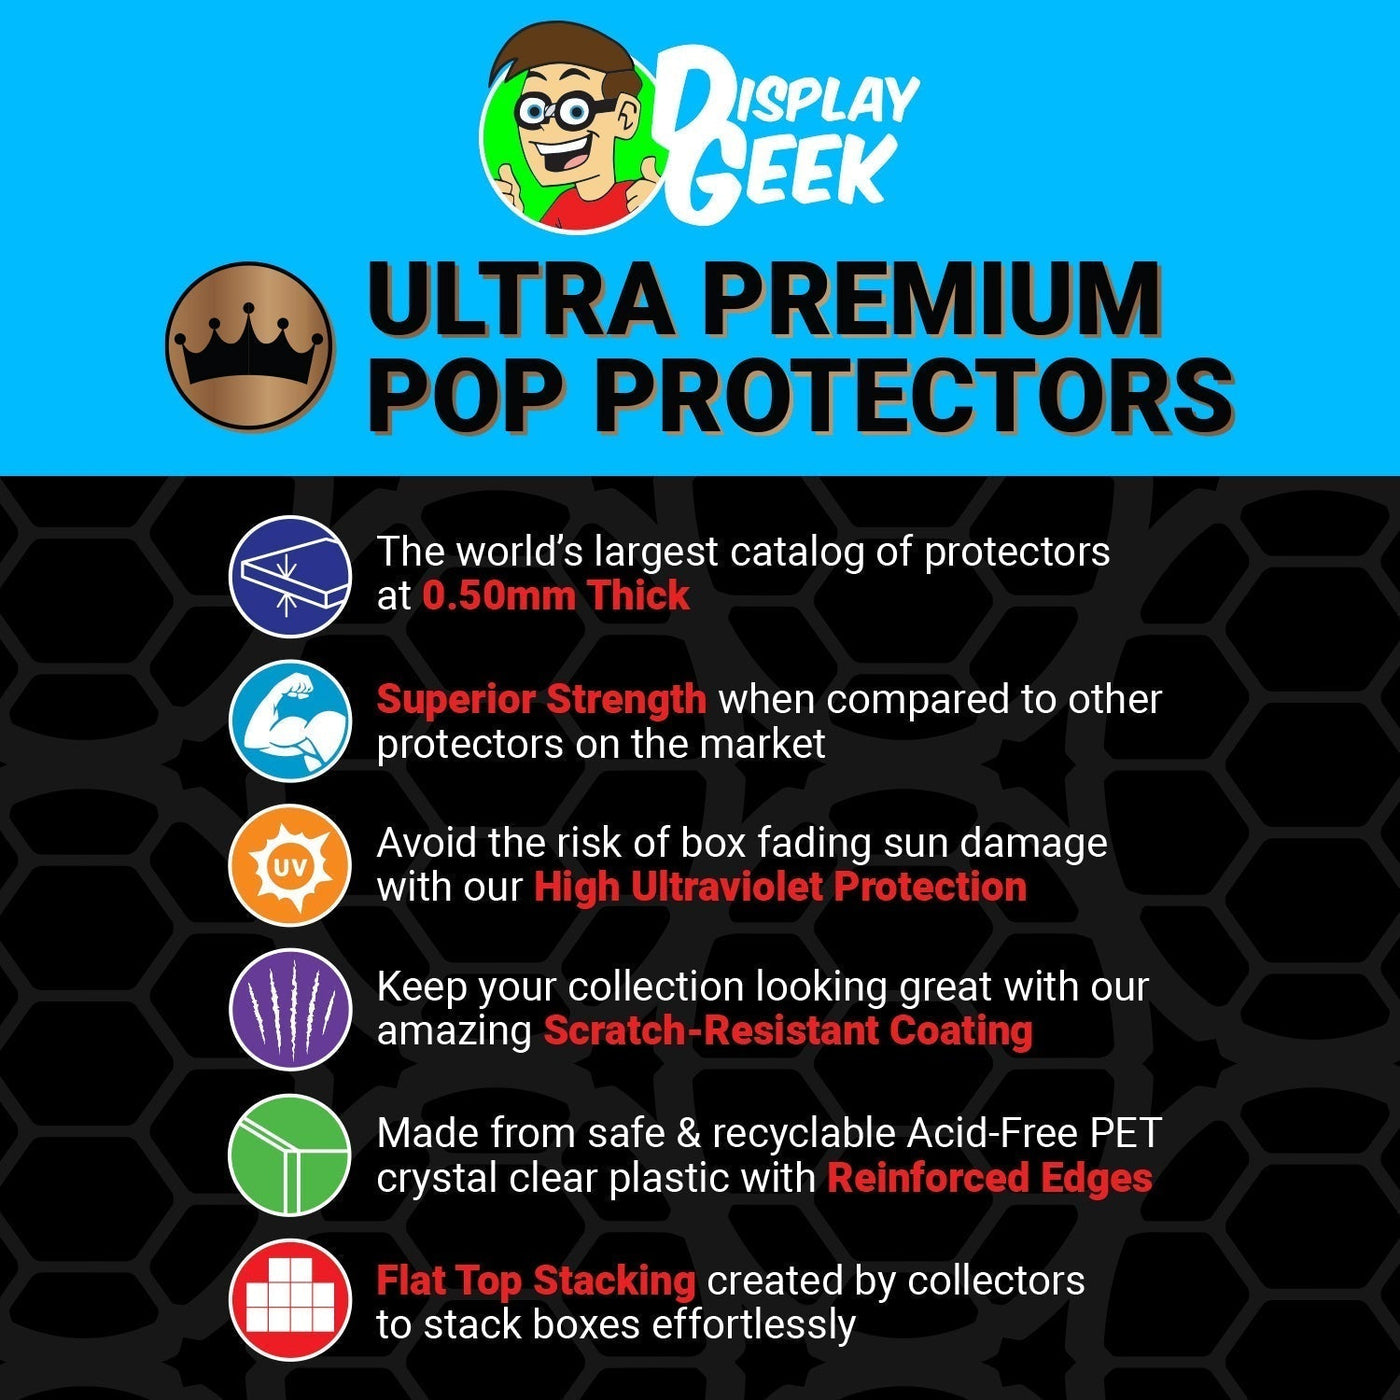 Pop Protector for Stephen Curry #13 Funko Pop Magazine Covers on The Protector Guide App by Display Geek